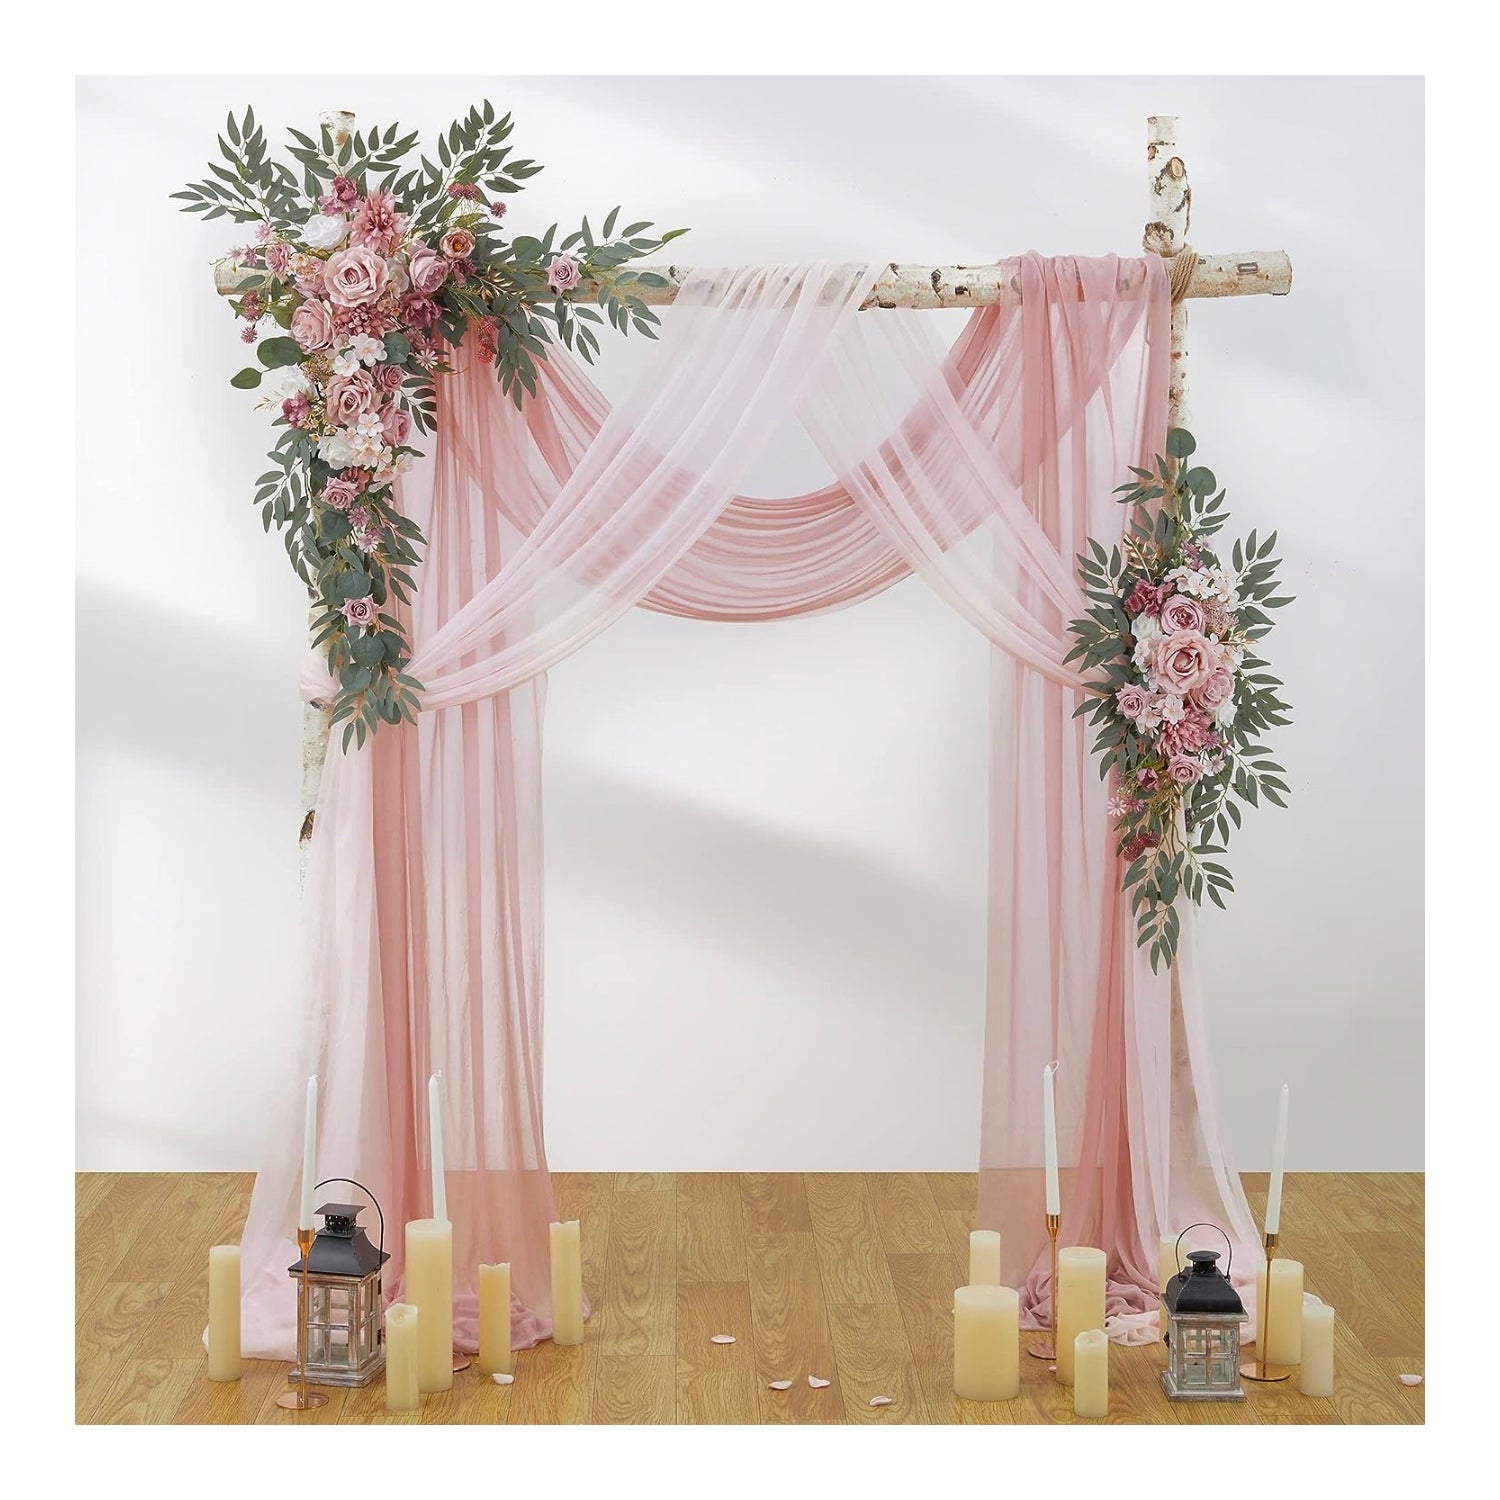 This wedding arch bouquet set is a fantastic deal at a very good price. The bouquets are so pretty and perfect for a wedding. If you&